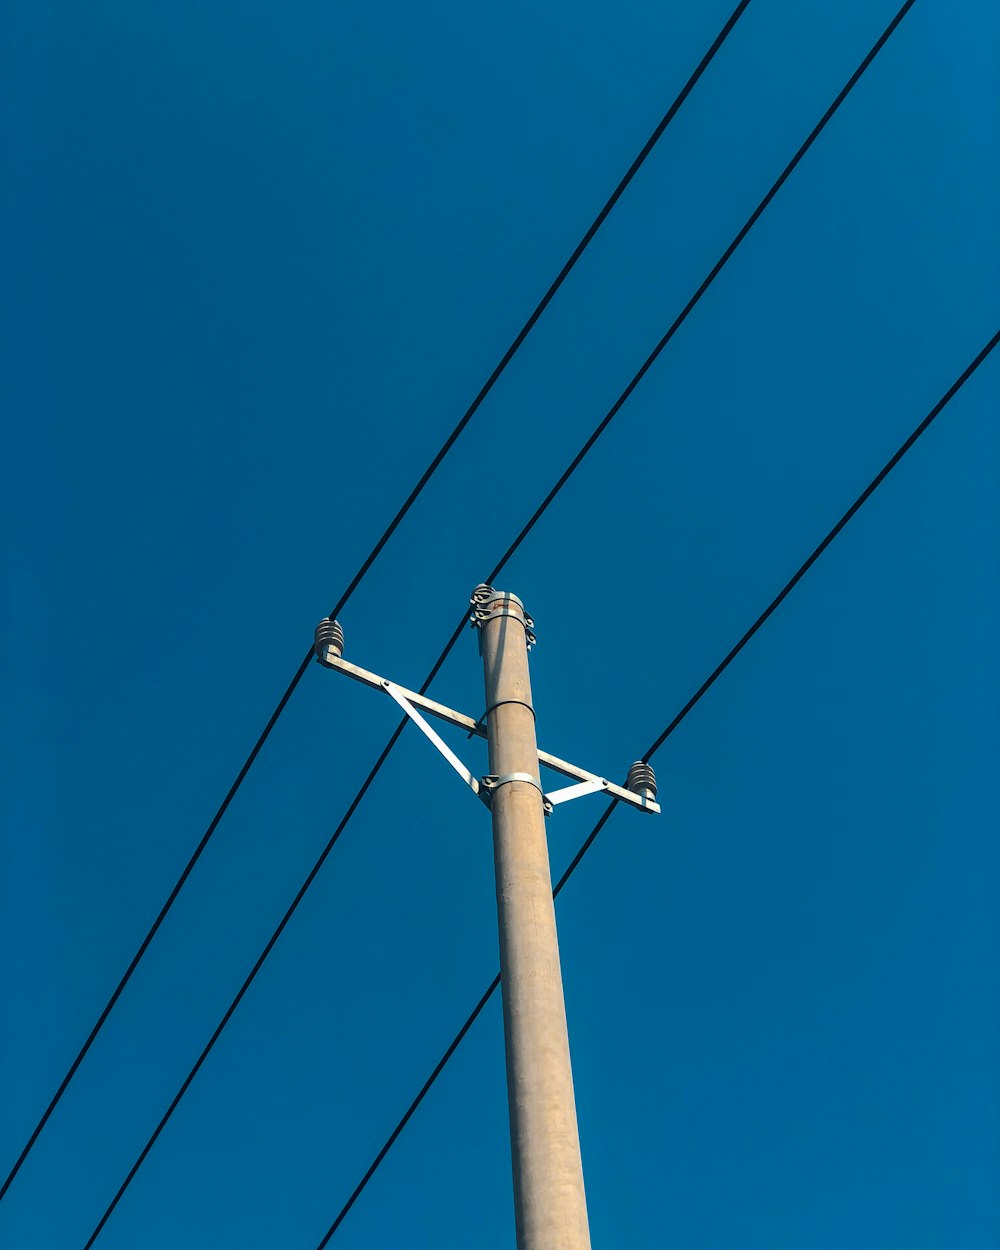 1K+ Electricity Pole Pictures | Download Free Images on Unsplash